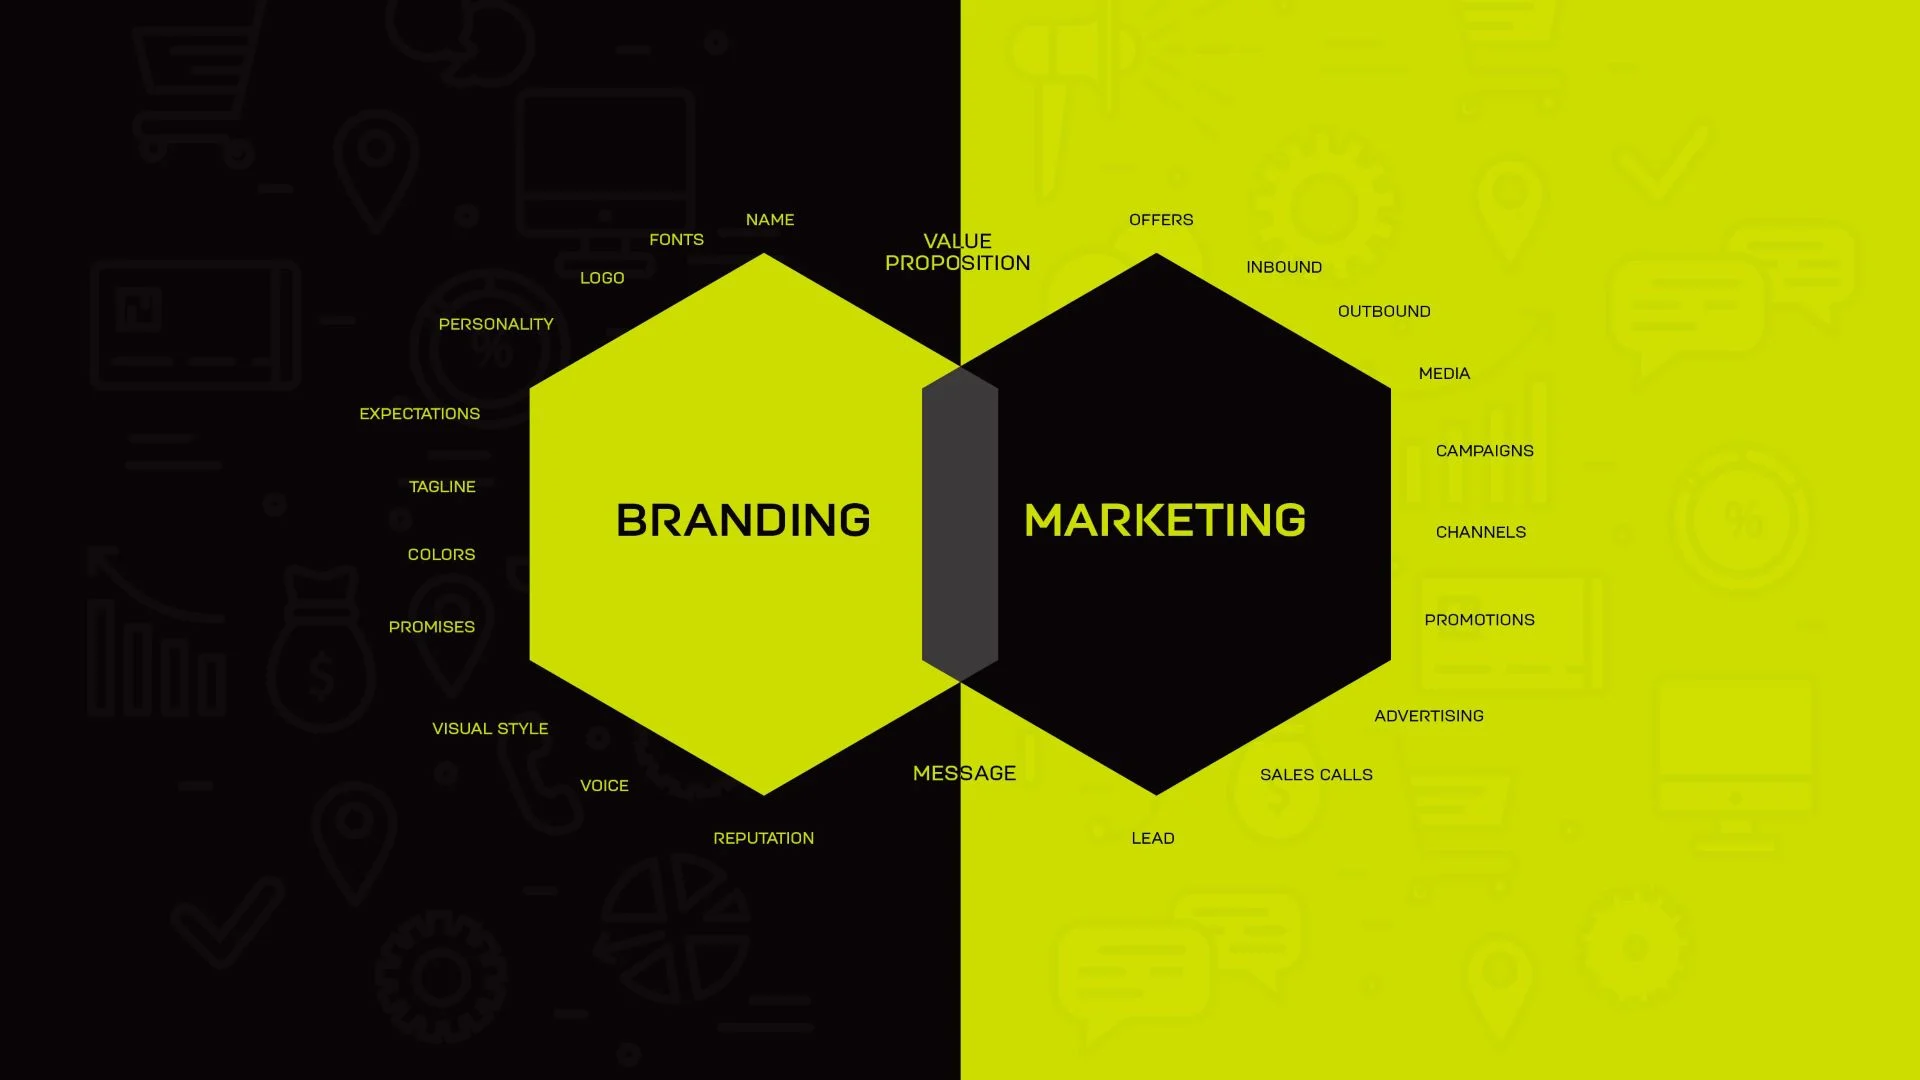 How Marketing And Branding Work Together